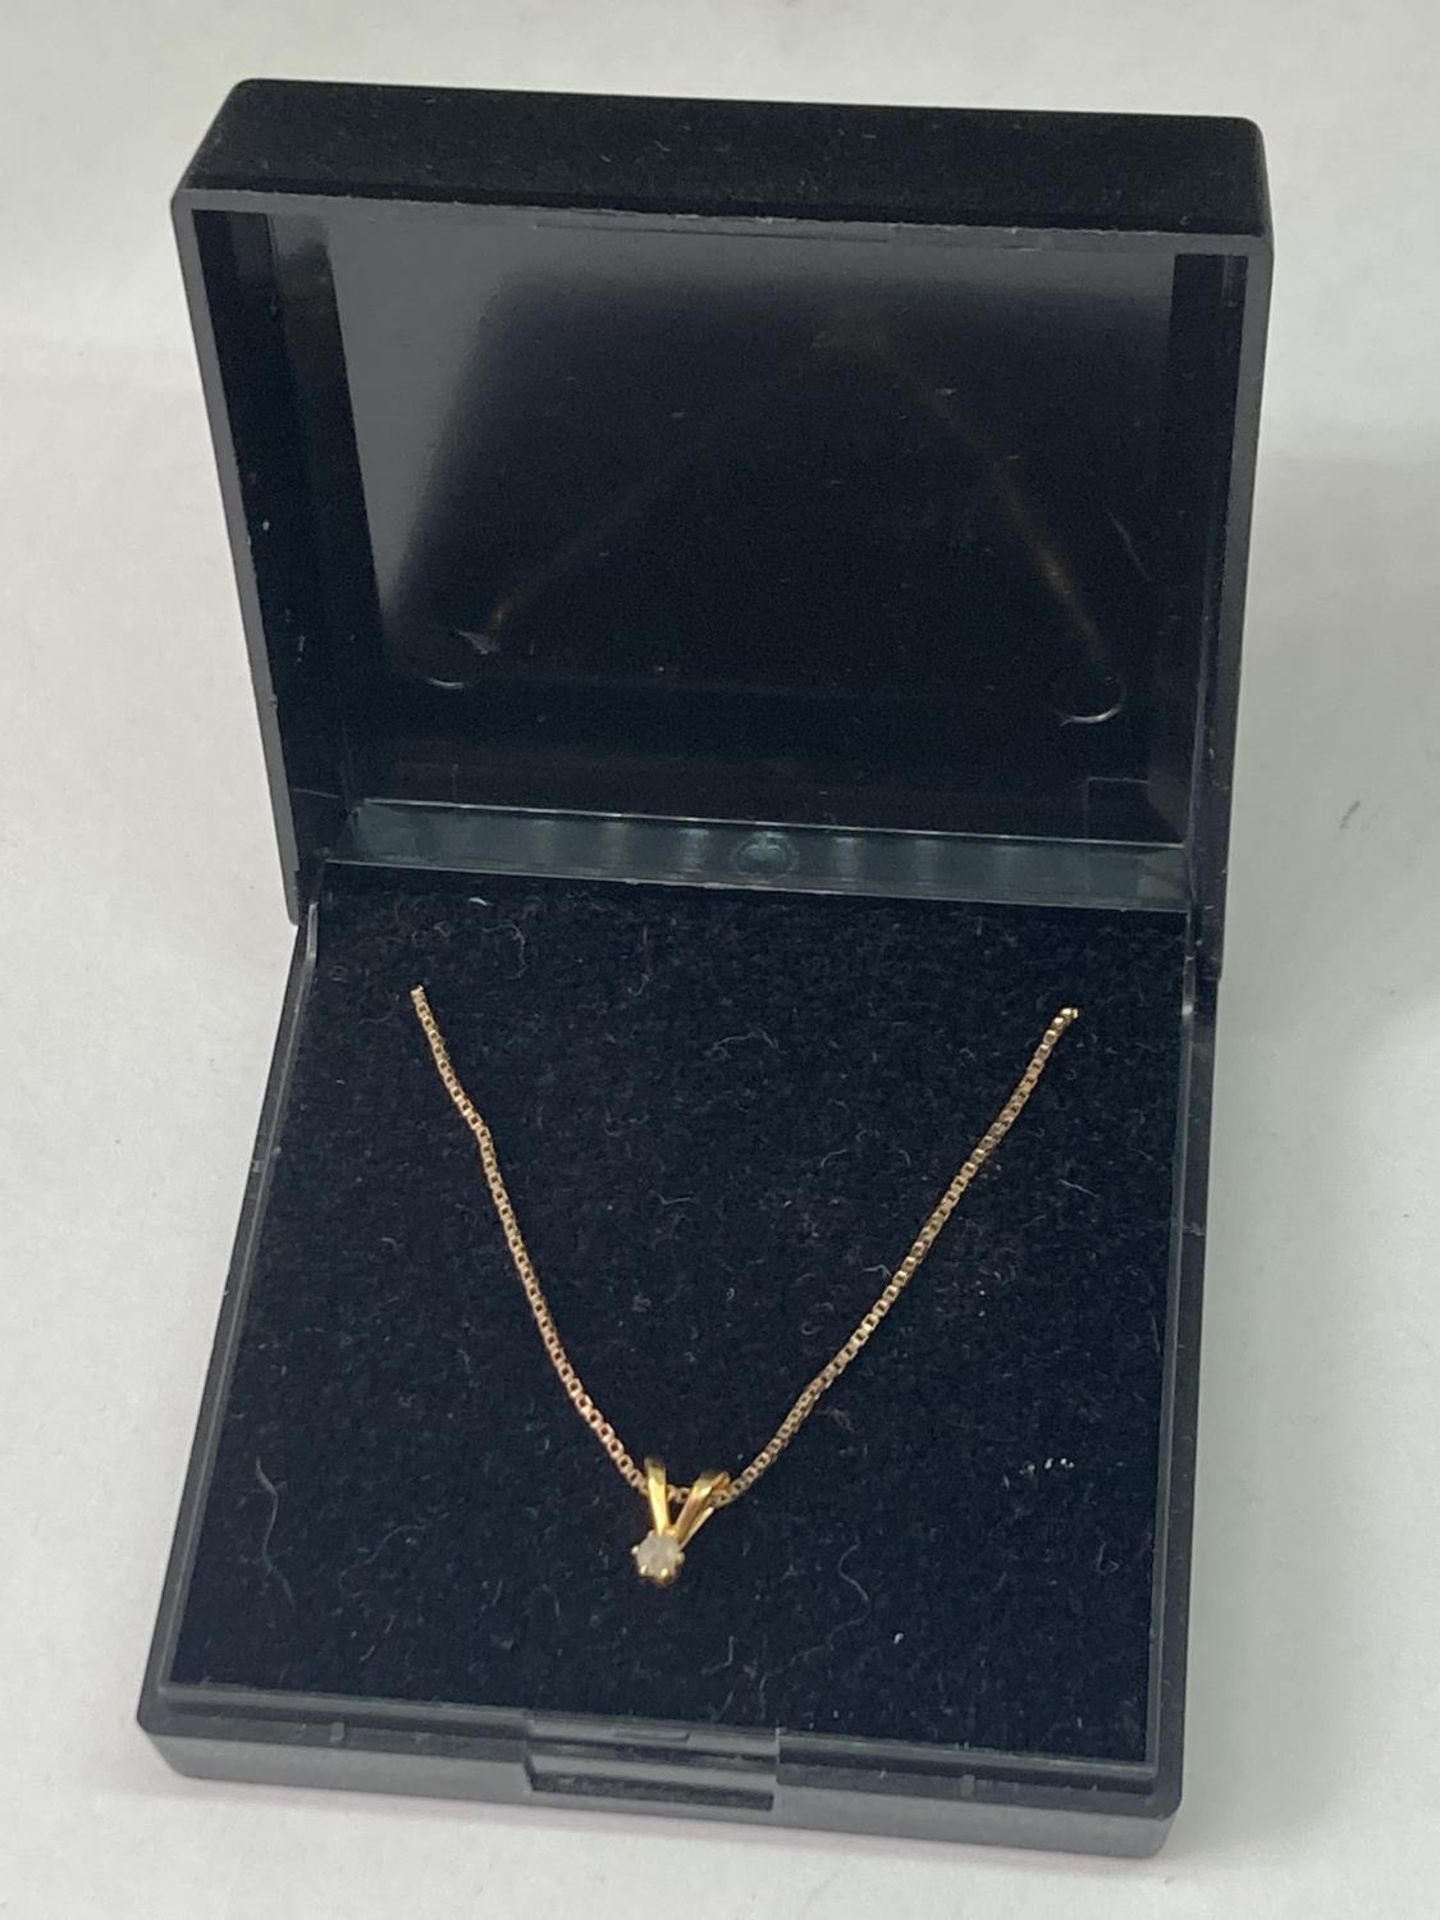 A 9 CARAT GOLD NECKLACE WITH A 9 CARAT GOLD AND DIAMOND PENDANT IN A PRESENTATION BOX - Image 2 of 10